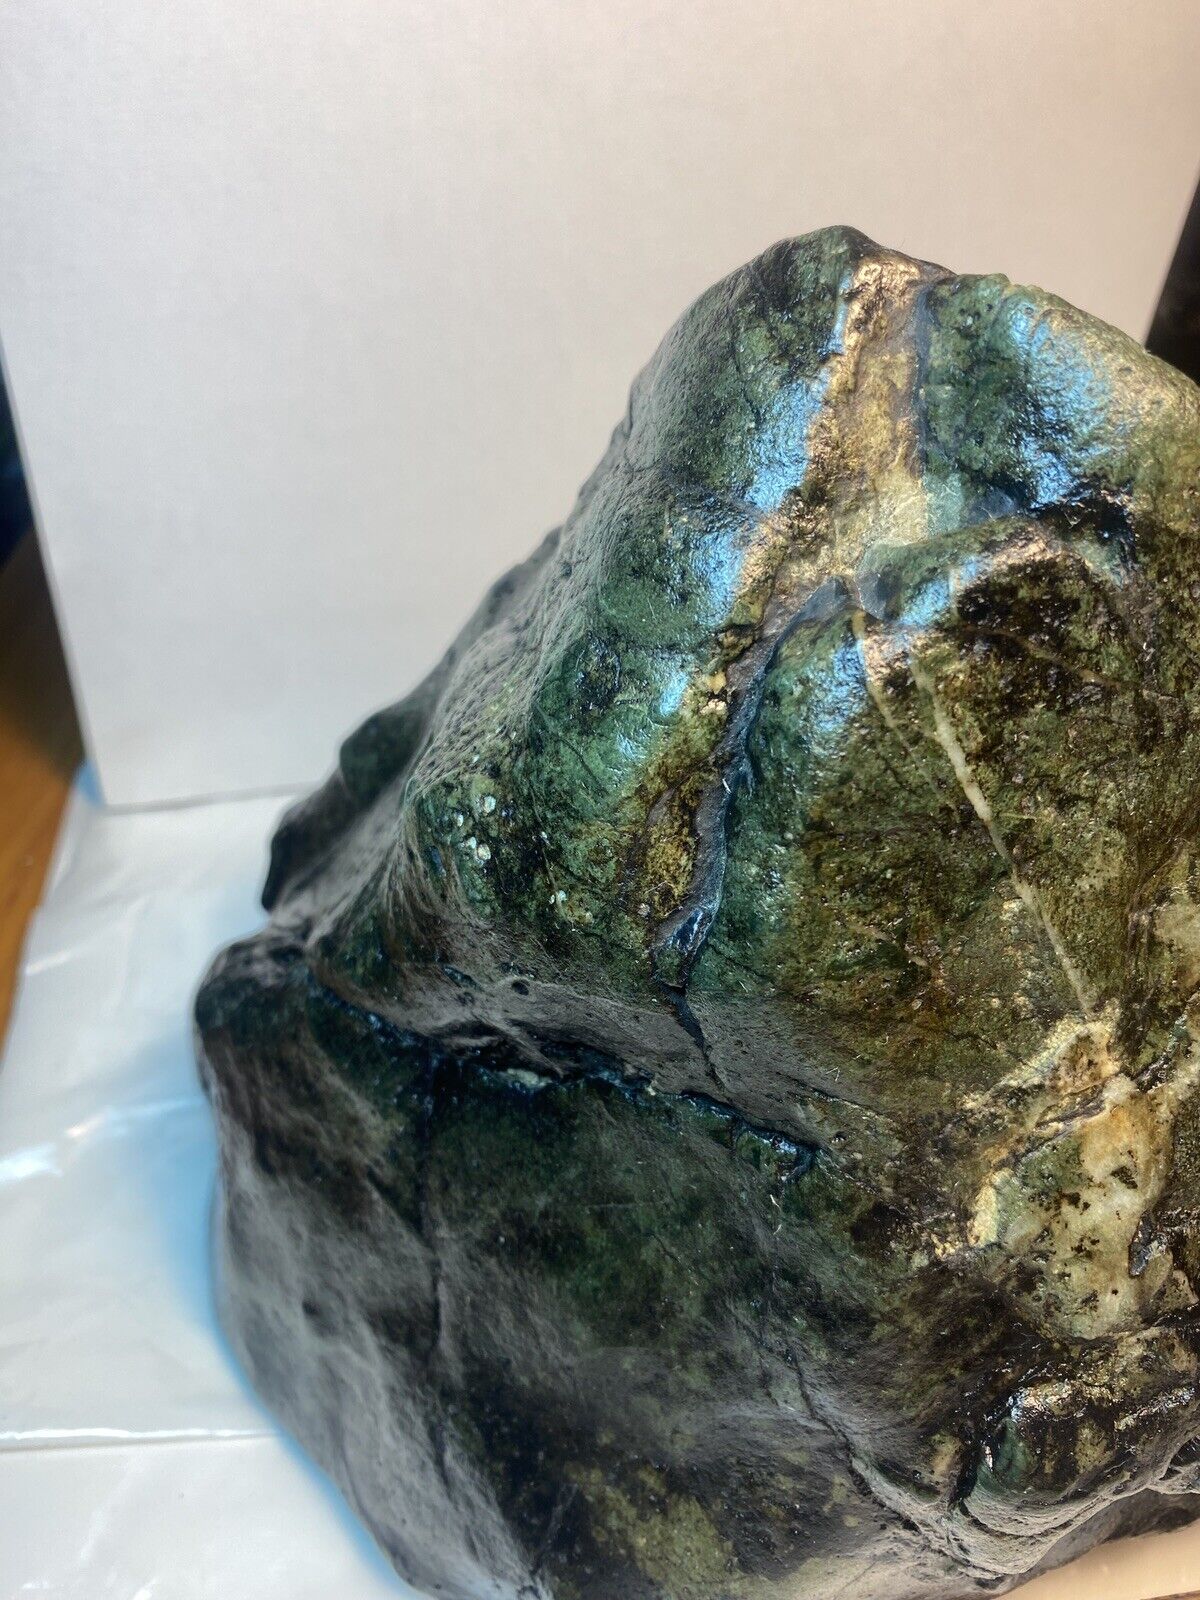 Super Large Rough Jade Boulder From The West Coast Whole Nodule 18+lbs